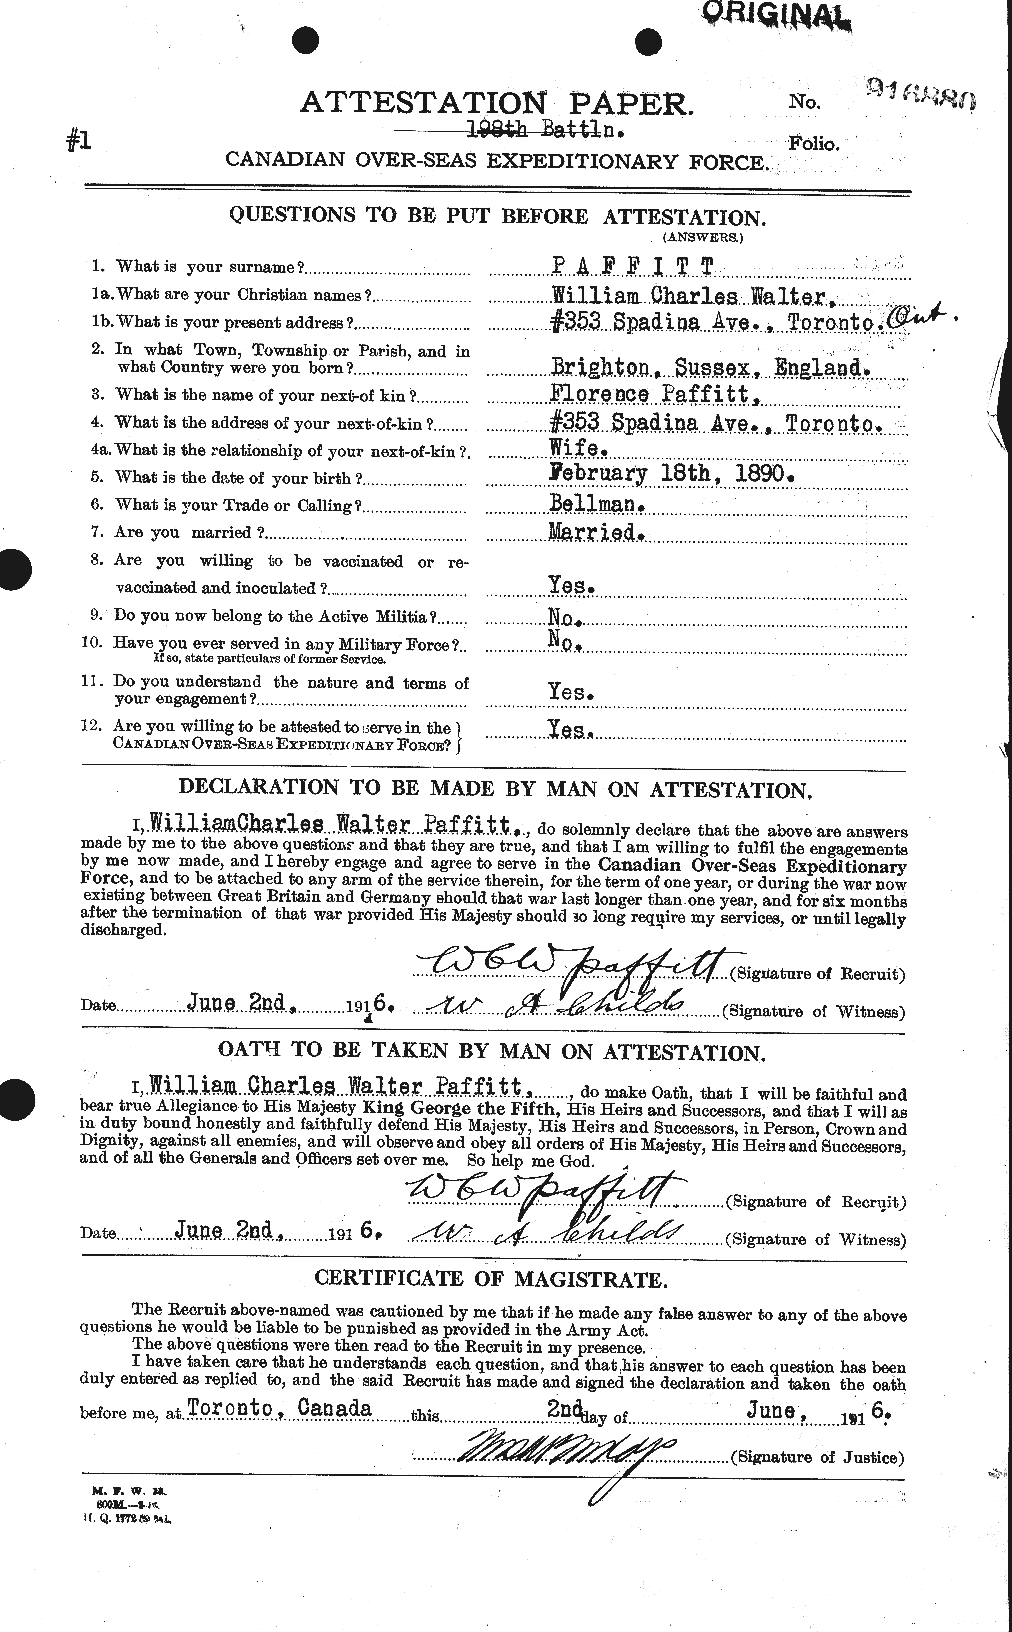 Personnel Records of the First World War - CEF 561960a